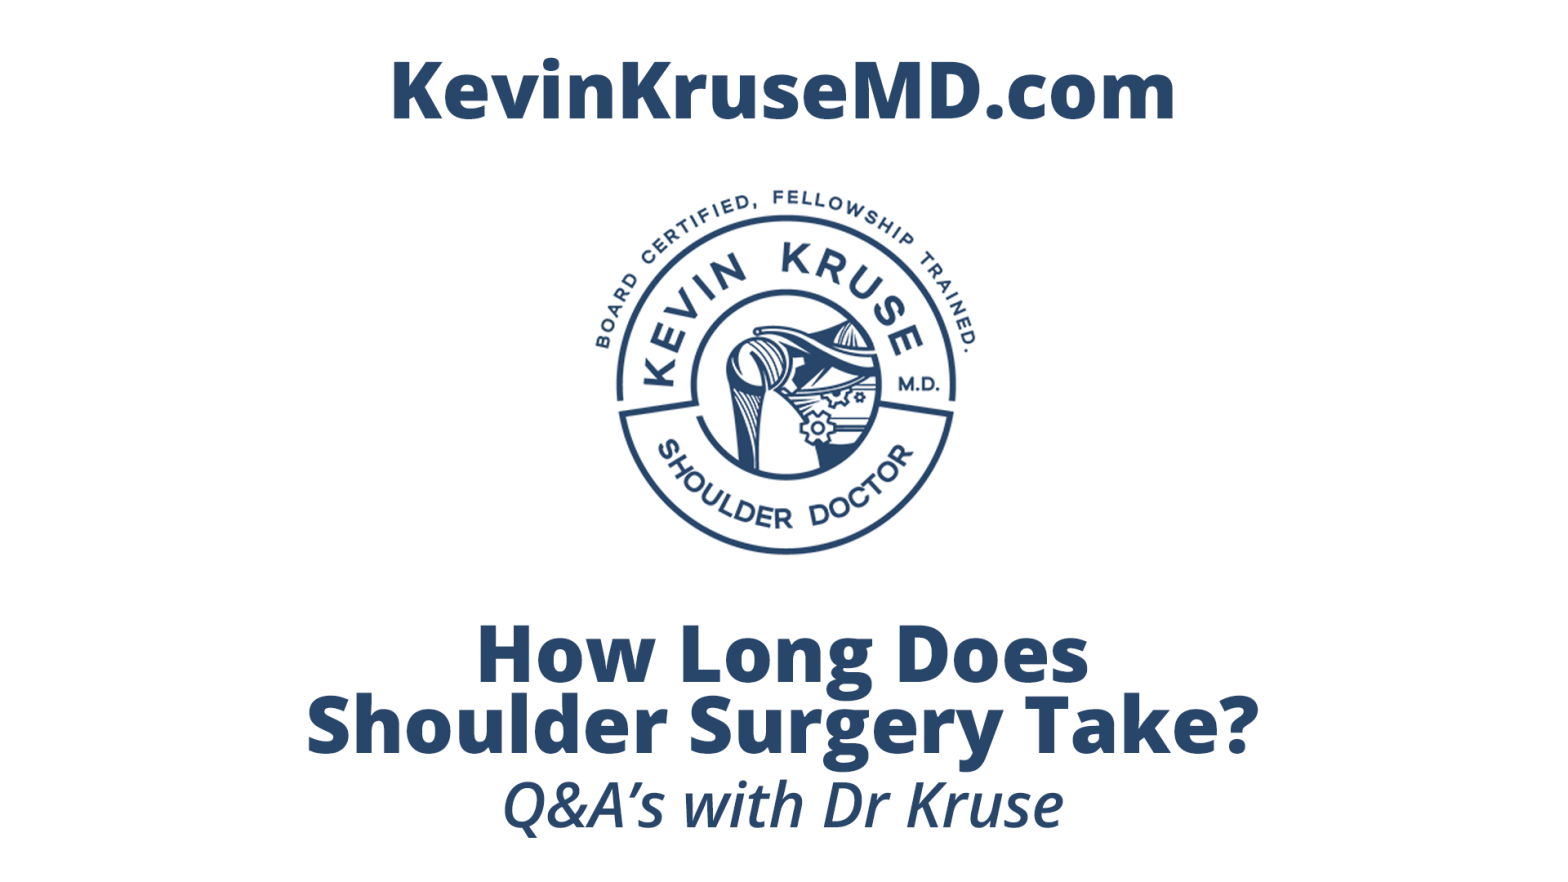 How long does shoulder surgery take